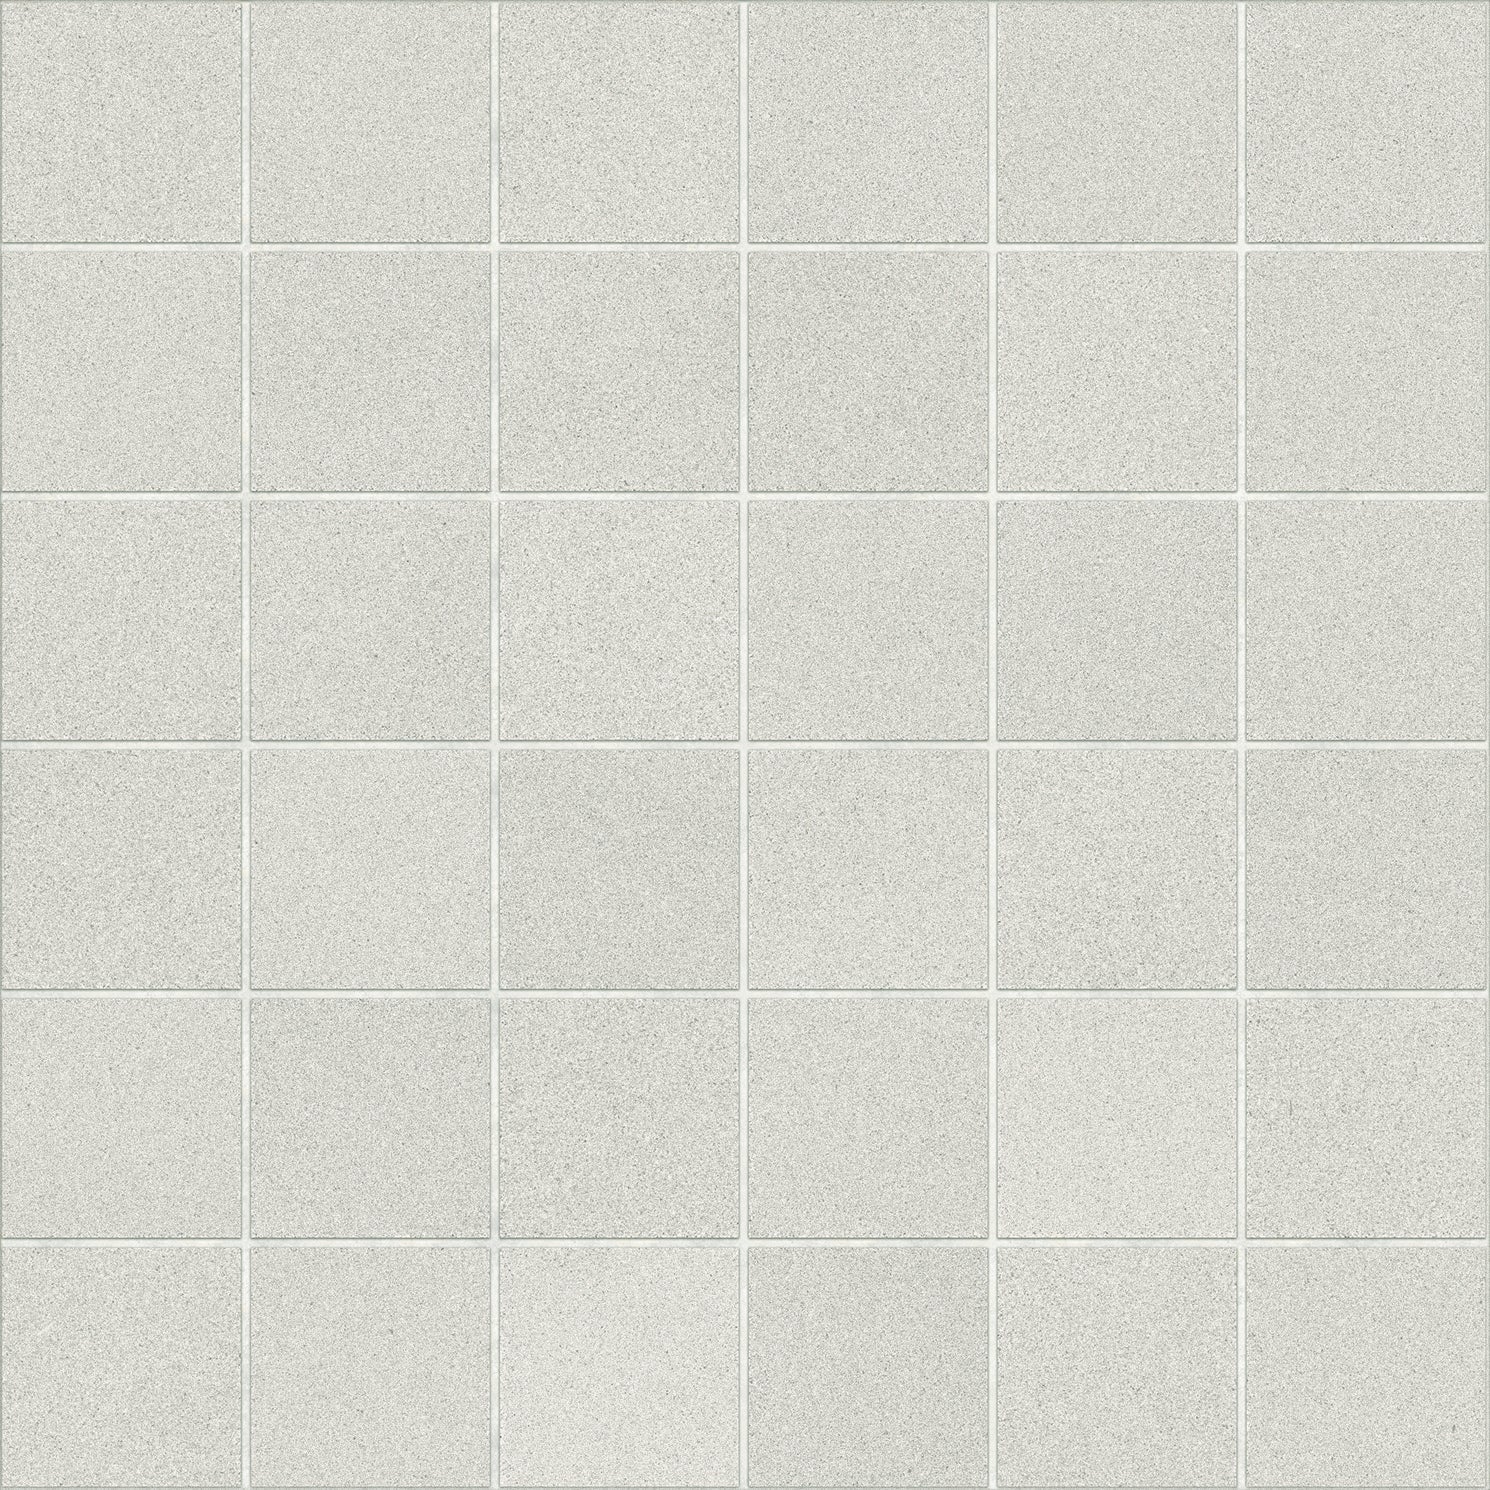 landmark 9mm masterplan white avenue straight stack 2x2 mosaic 12x12x9mm matte rectified porcelain tile distributed by surface group international